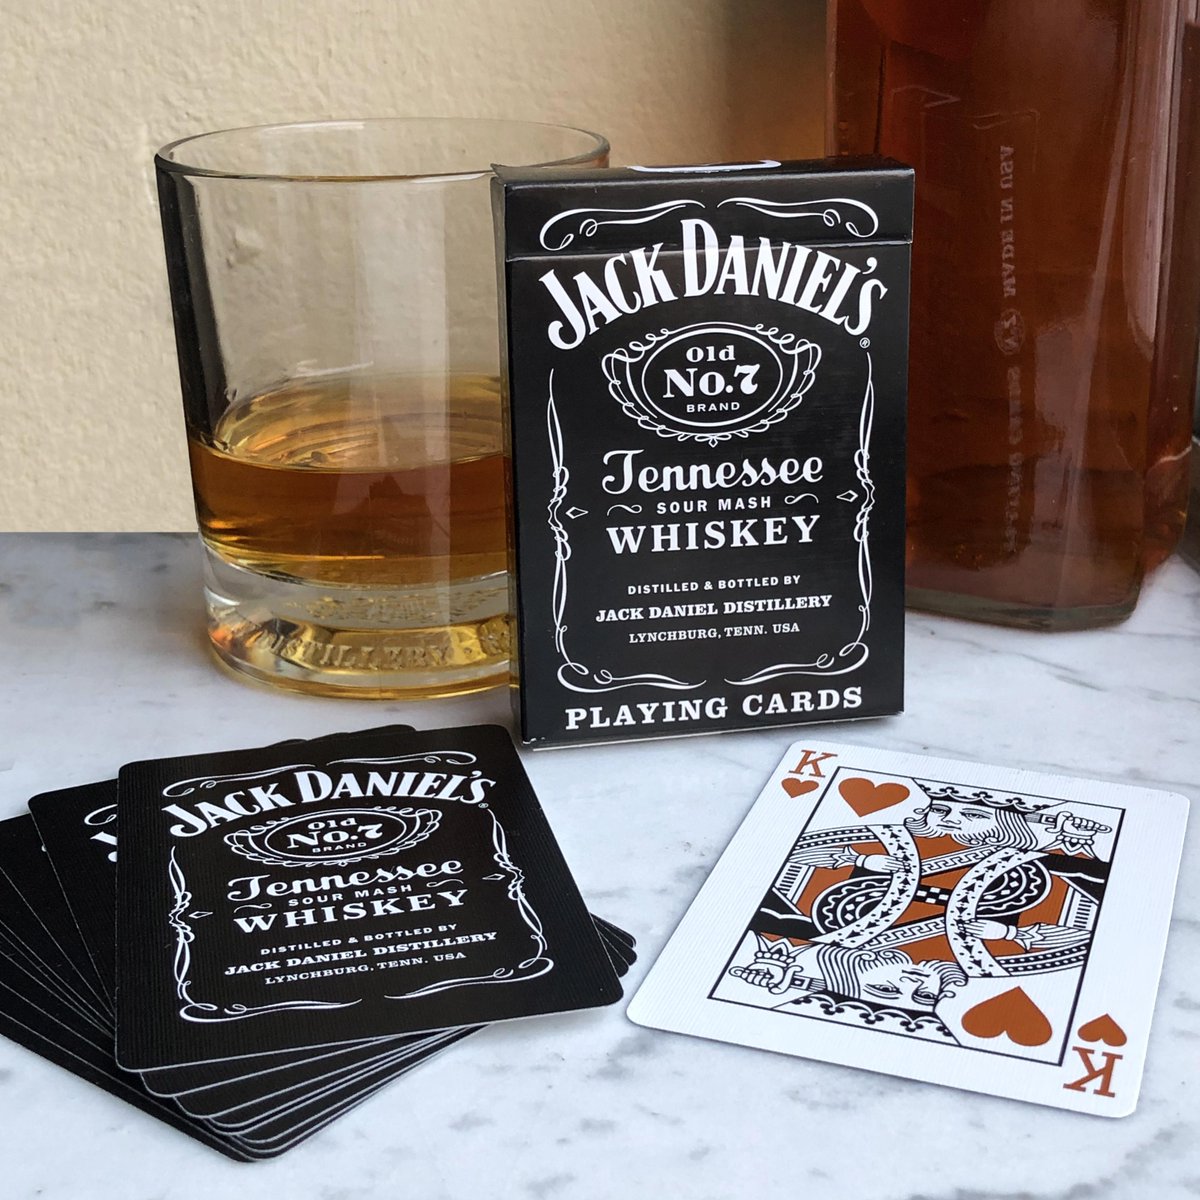 Bicycle Cards On Twitter You Are Carrying On A Rich Tradition When You Carry A Deck Of Jack Daniel S Playing Cards By Bicycle To Your Next Poker Night Check Out